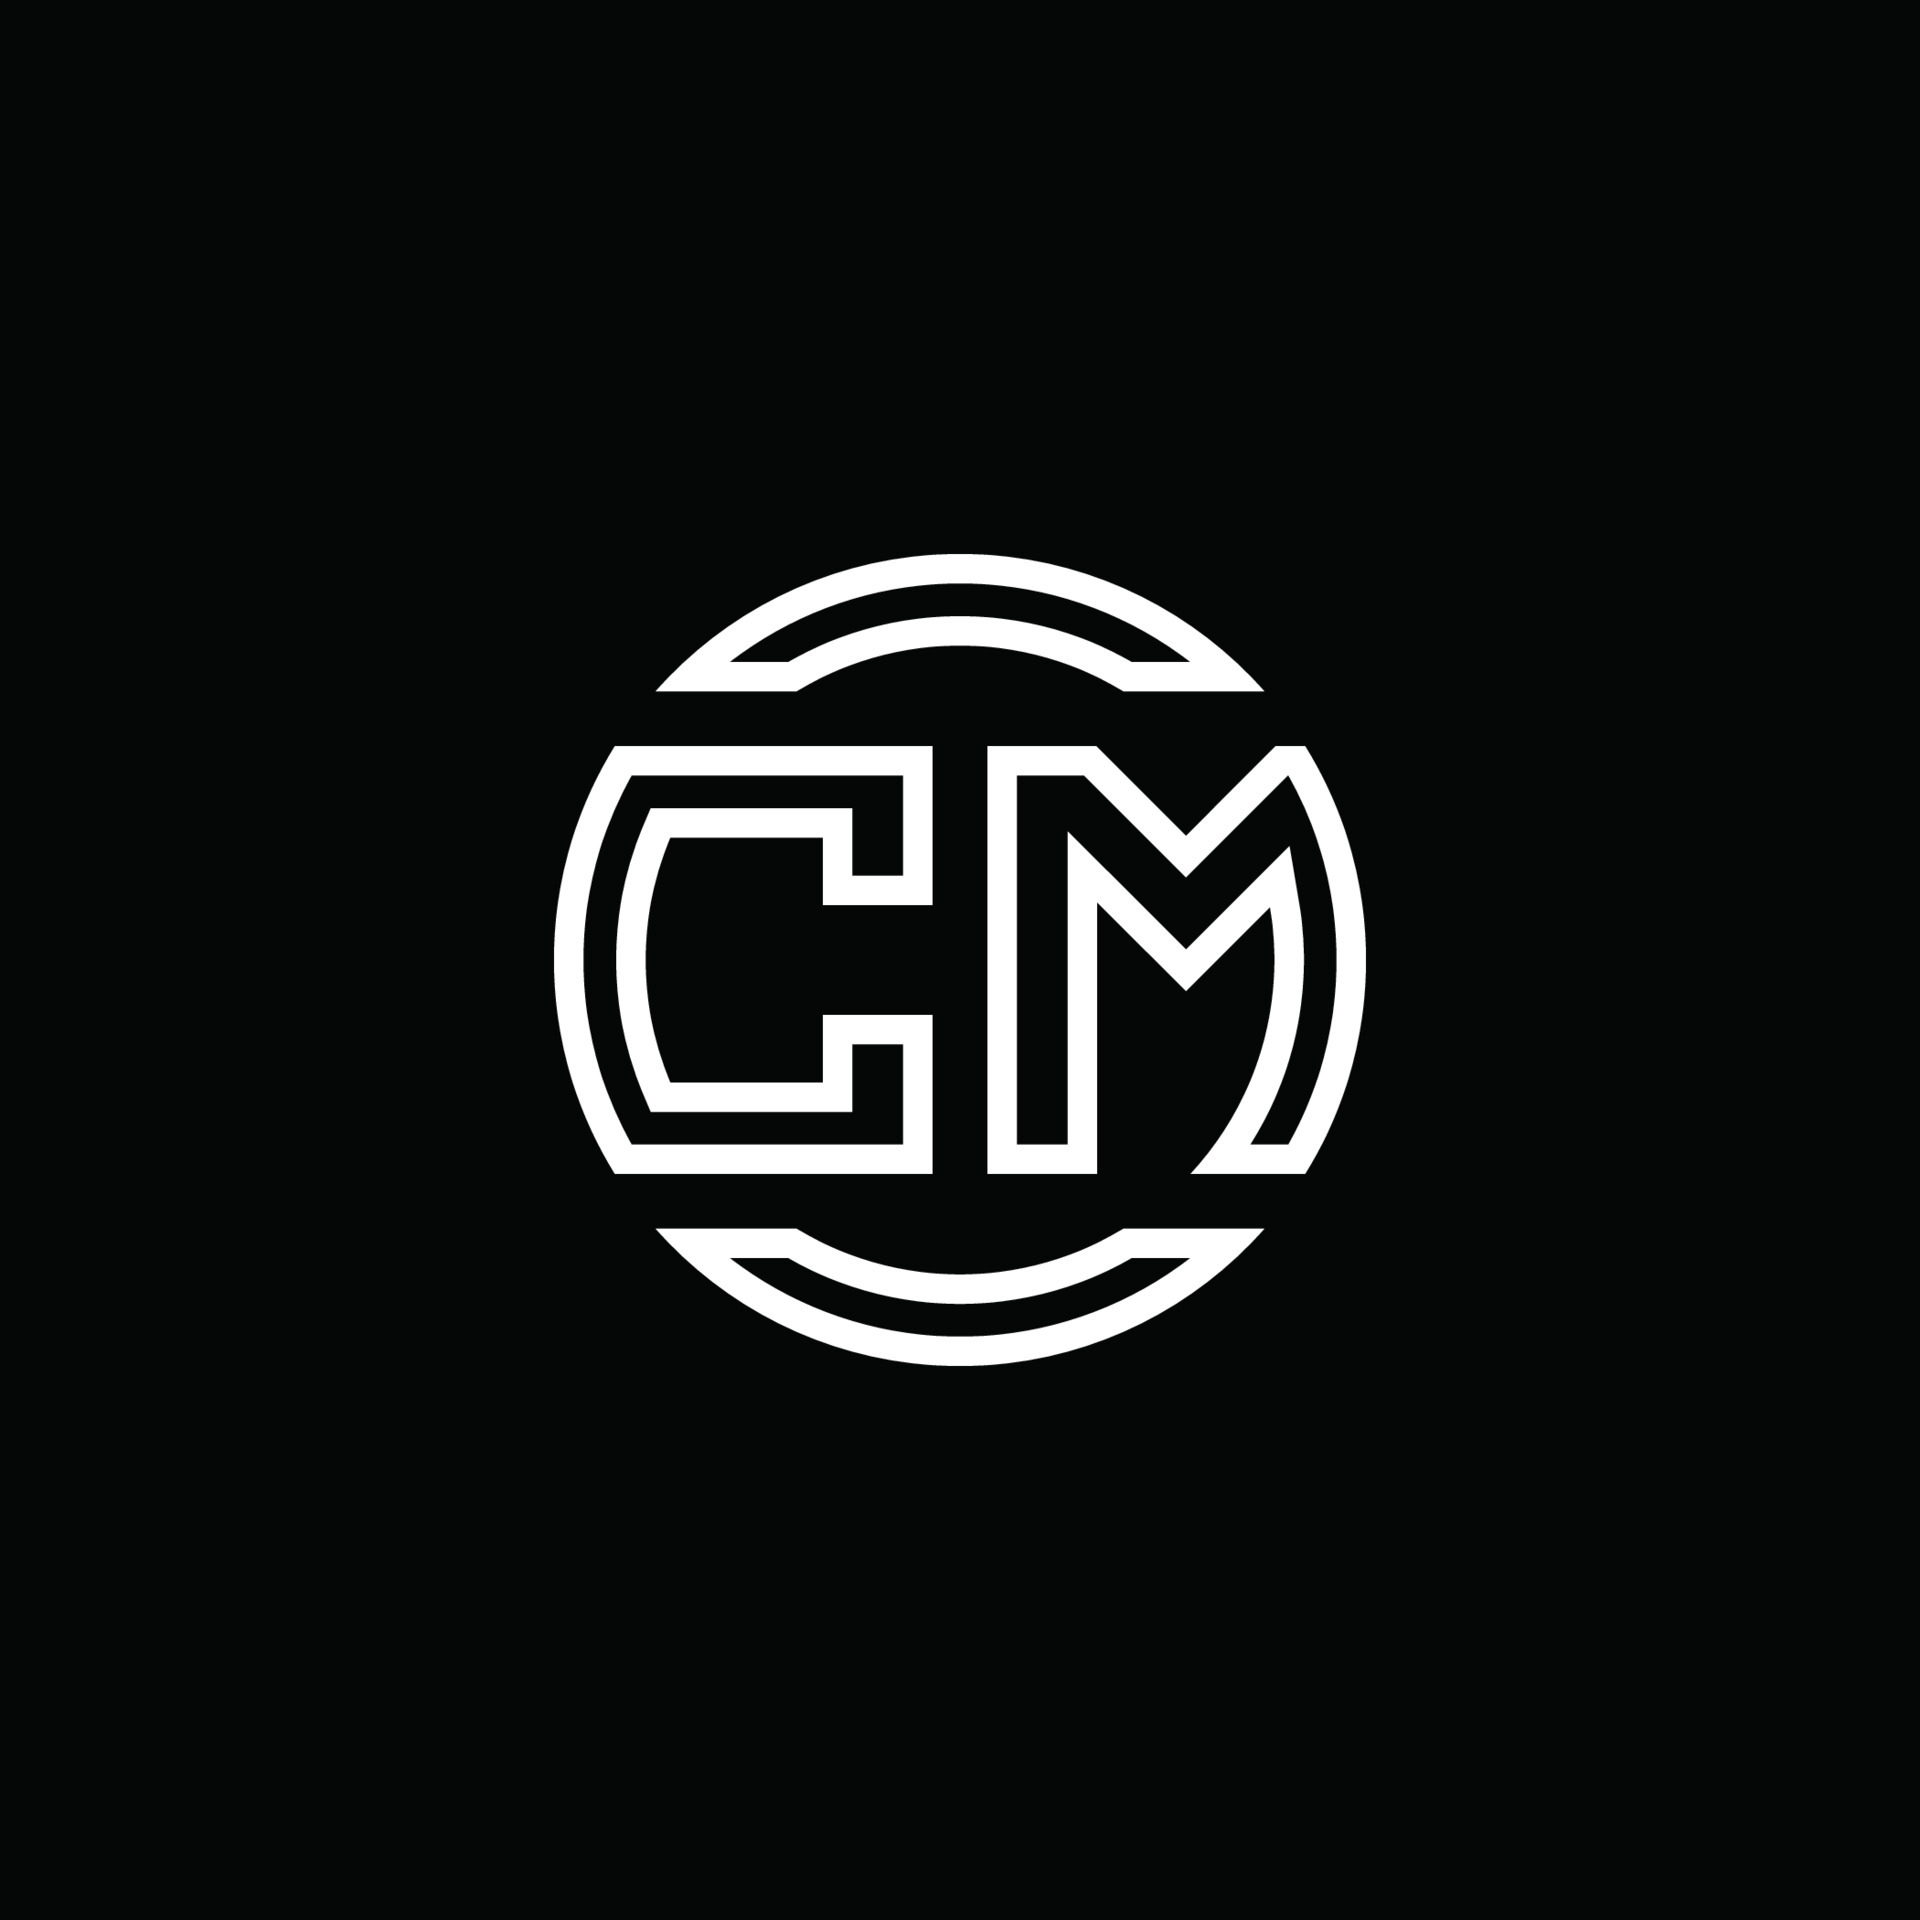 CM logo monogram with negative space circle rounded design template ...